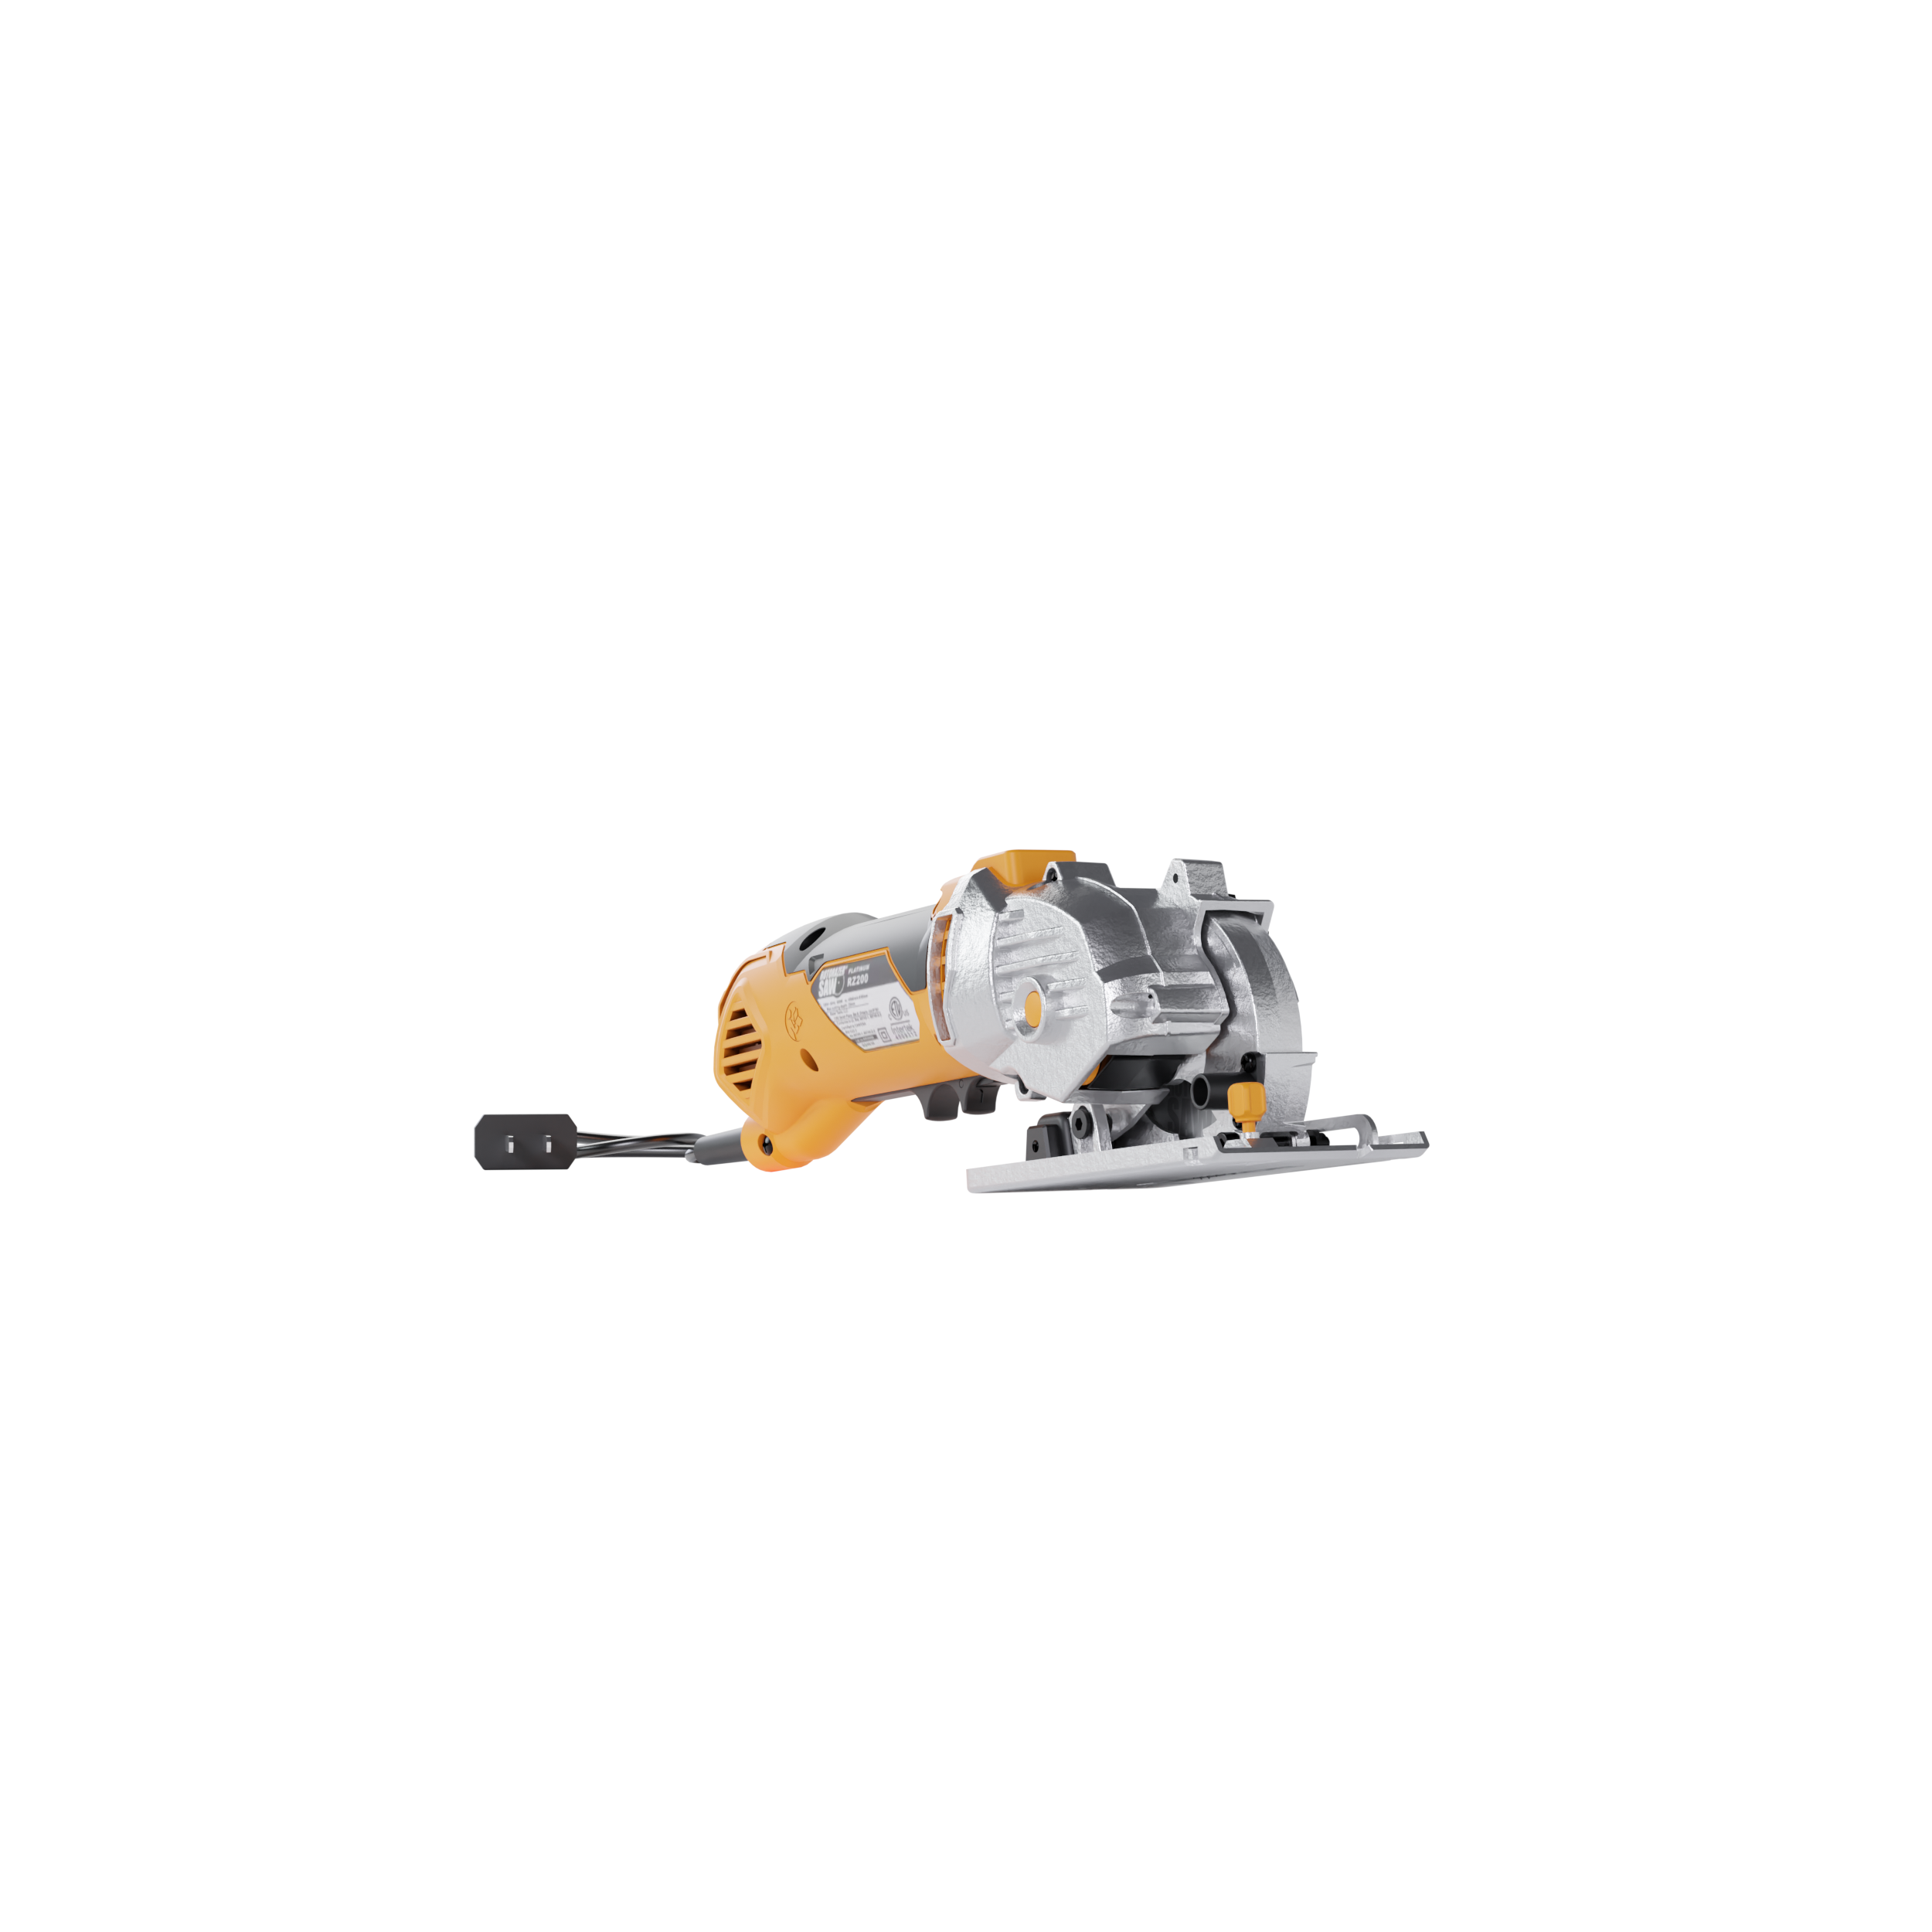 ROTORAZER SAW Platinum Compact Circular Saw Set - Extra Powerful - Deeper  Cuts! DIY Projects - Cut Drywall, Tile, Grout, Metal, Pipes, PVC, Plastic,  and Copper. AS SEEN ON TV! 